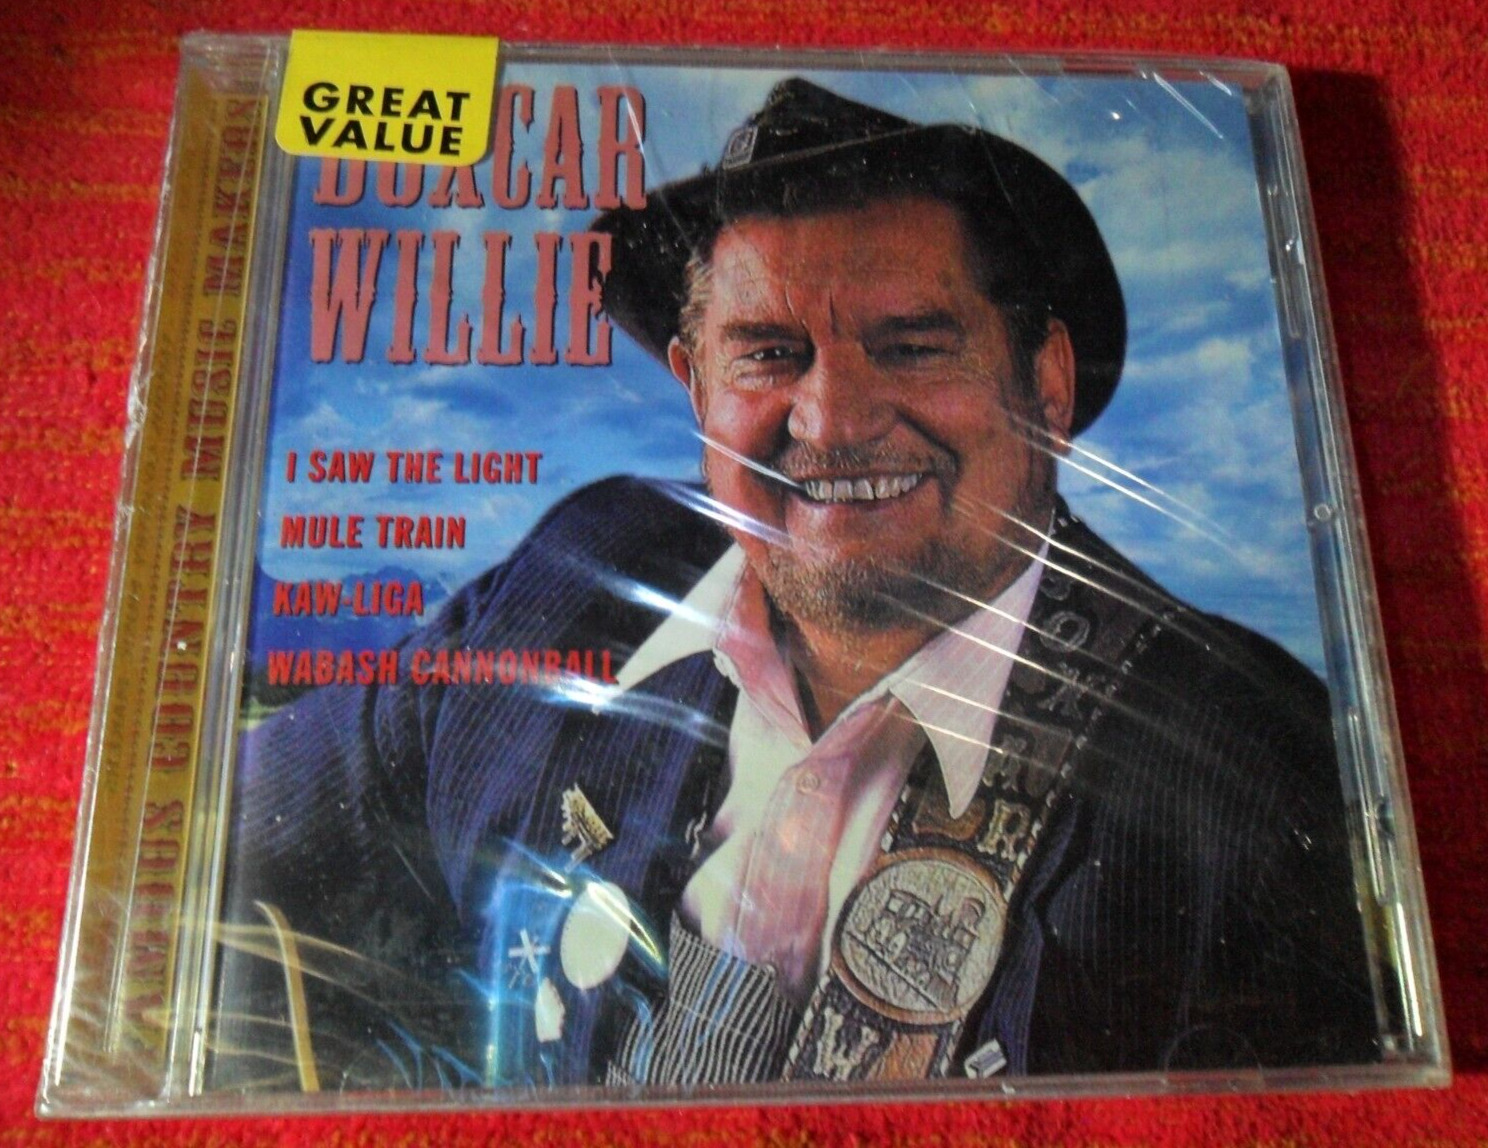 2001 BOXCAR WILLIE LIVE 1982 FAMOUS COUNTRY MUSIC CD - RARE NEW & SEALED ENGLAND